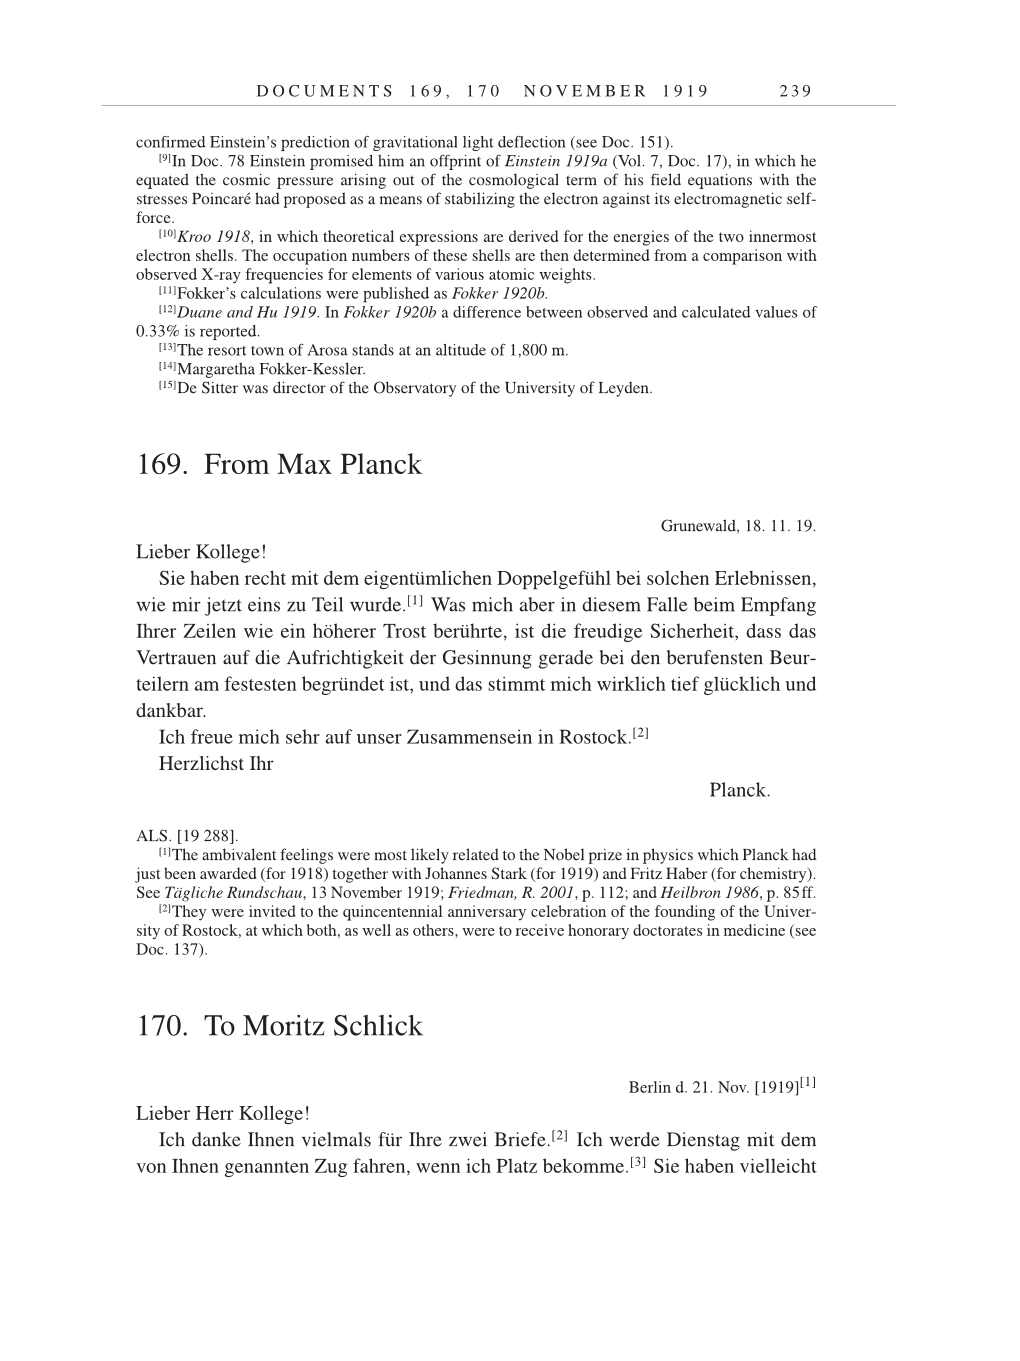 Volume 9: The Berlin Years: Correspondence January 1919-April 1920 page 239